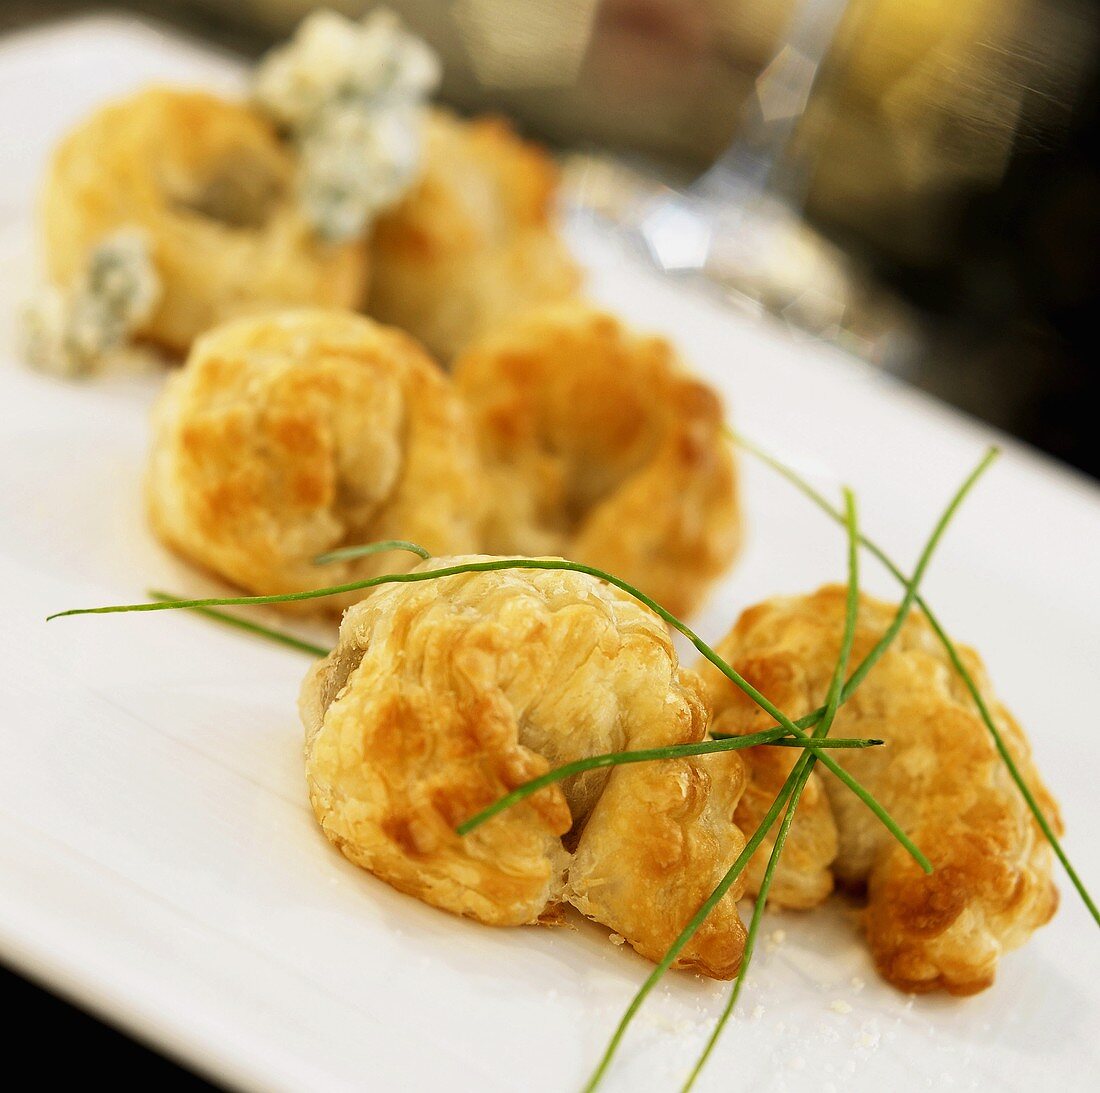 Appetizer Platter of Olive Stuffed Puff Pastry with Chive Garnish